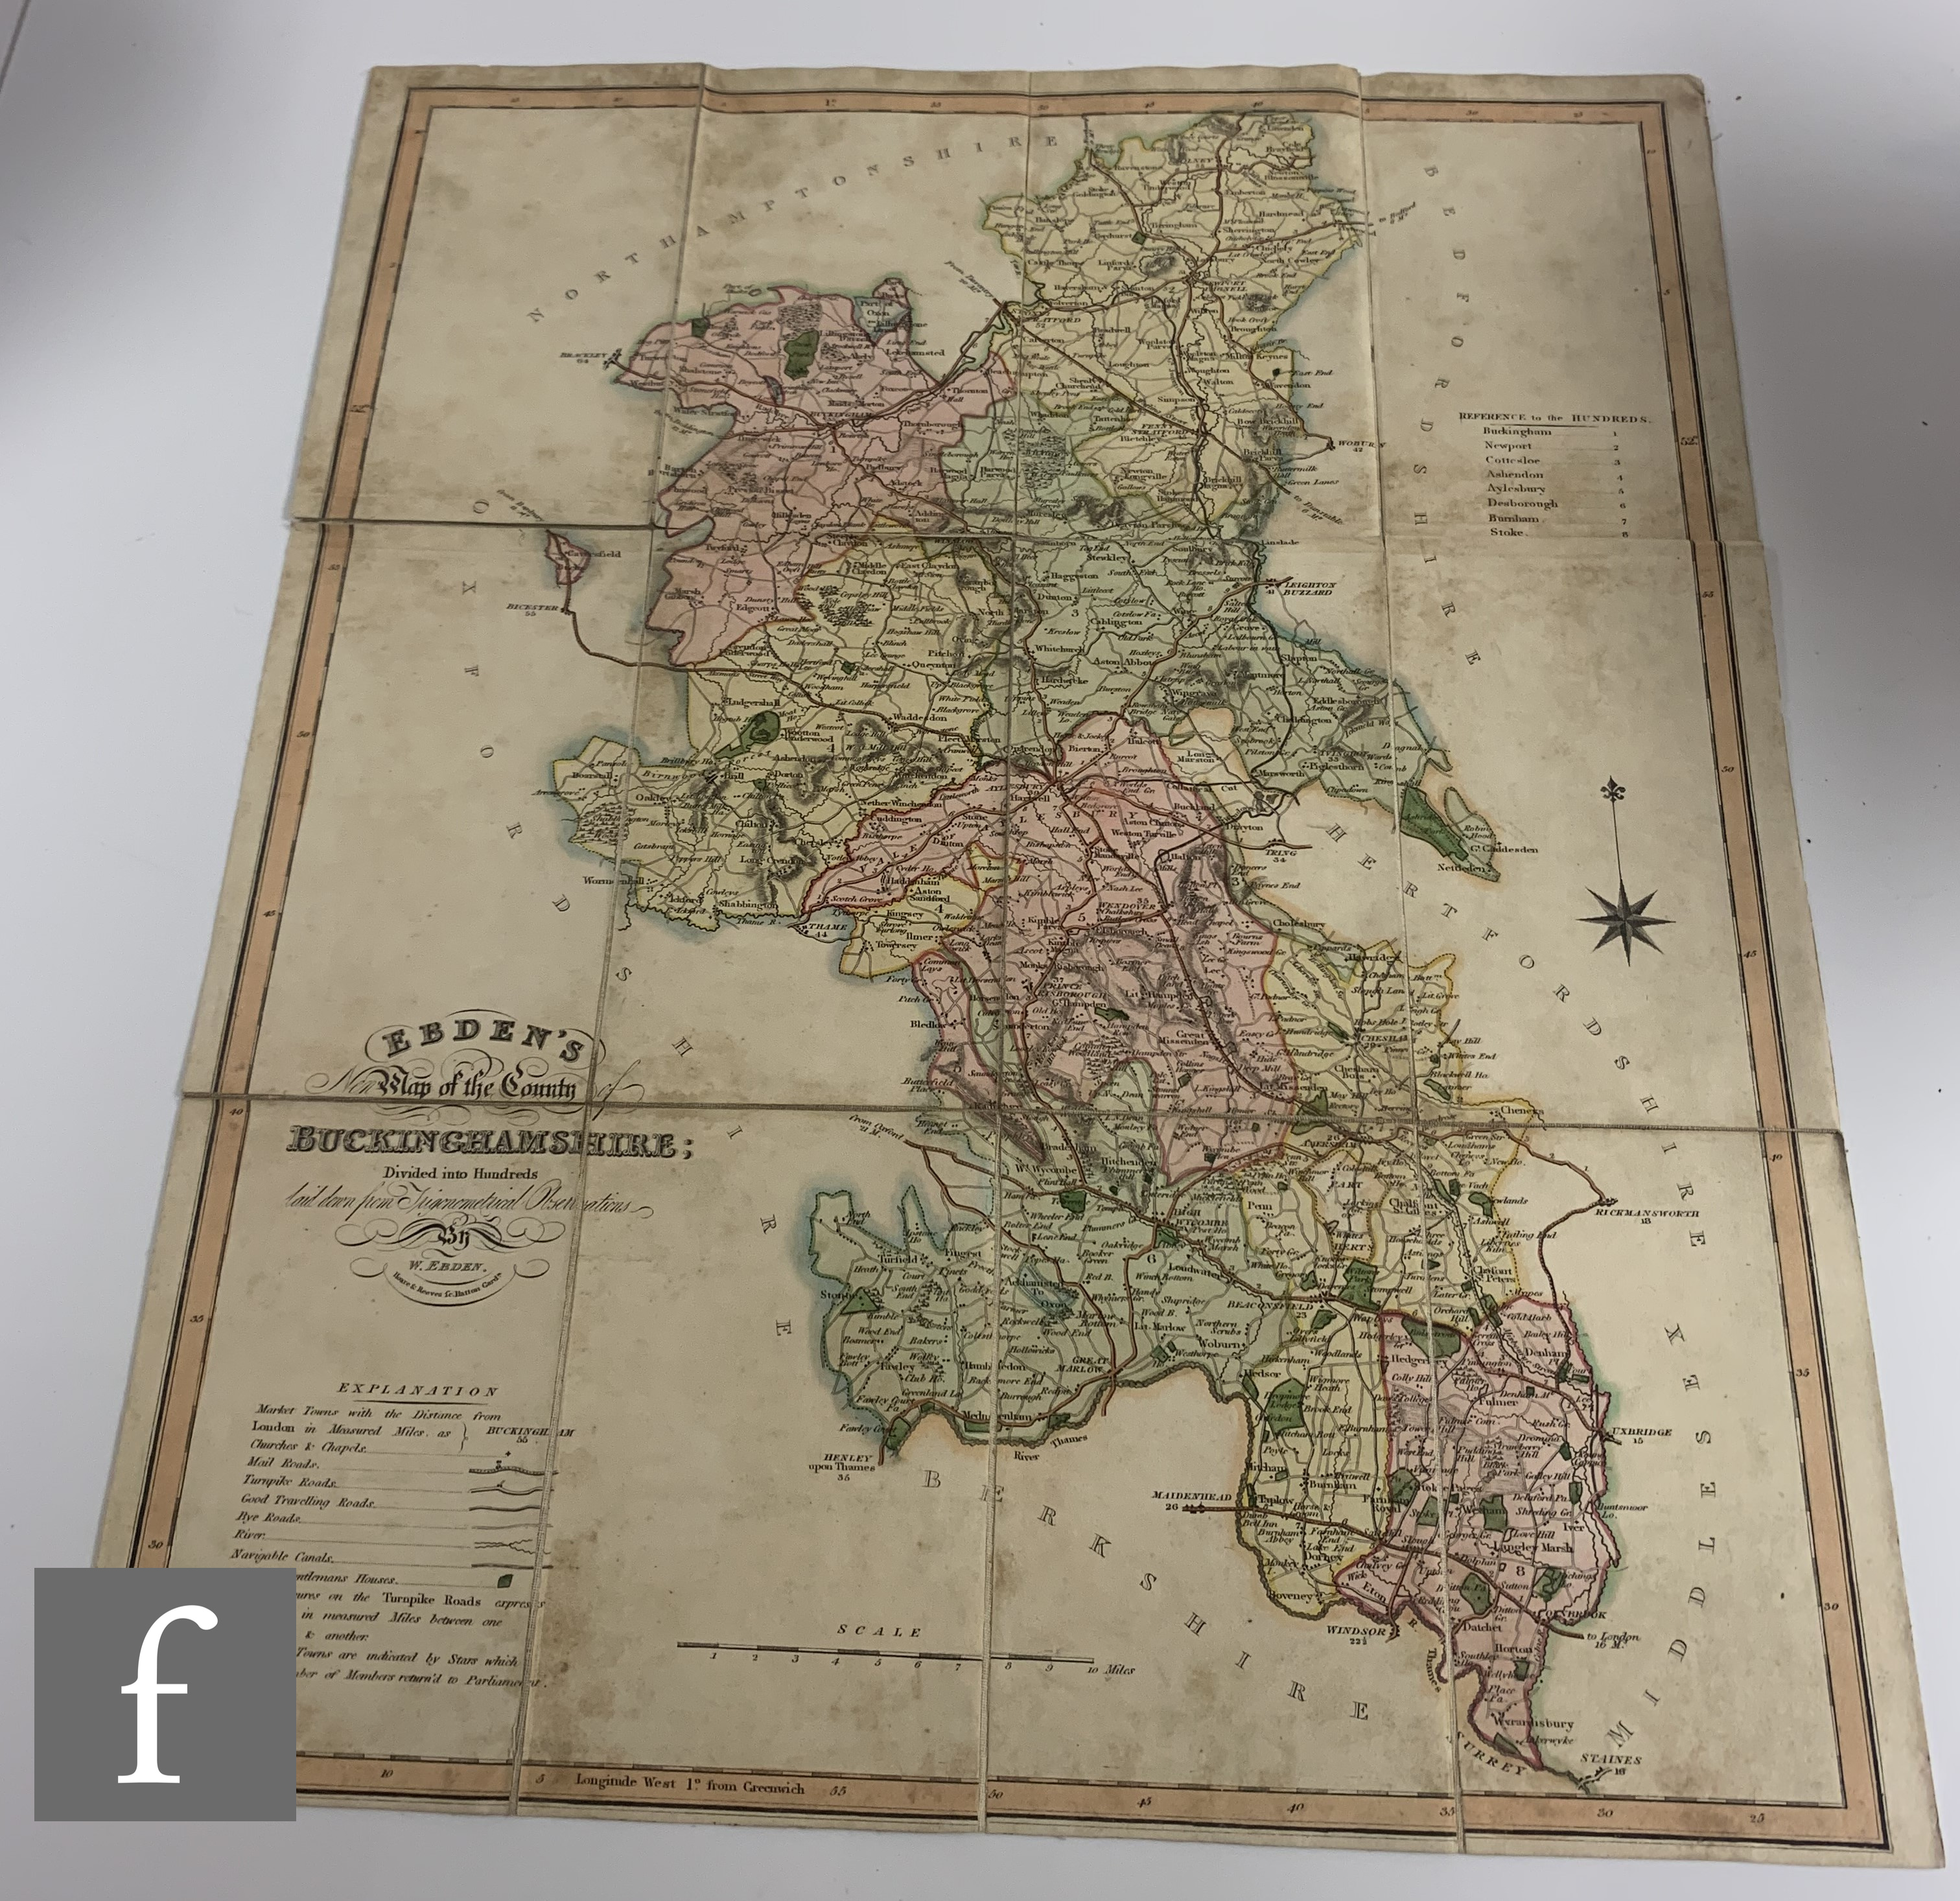 A 19th Century Cary's folding map of England and Wales, another Bowle's Seven United Provinces of - Image 4 of 5